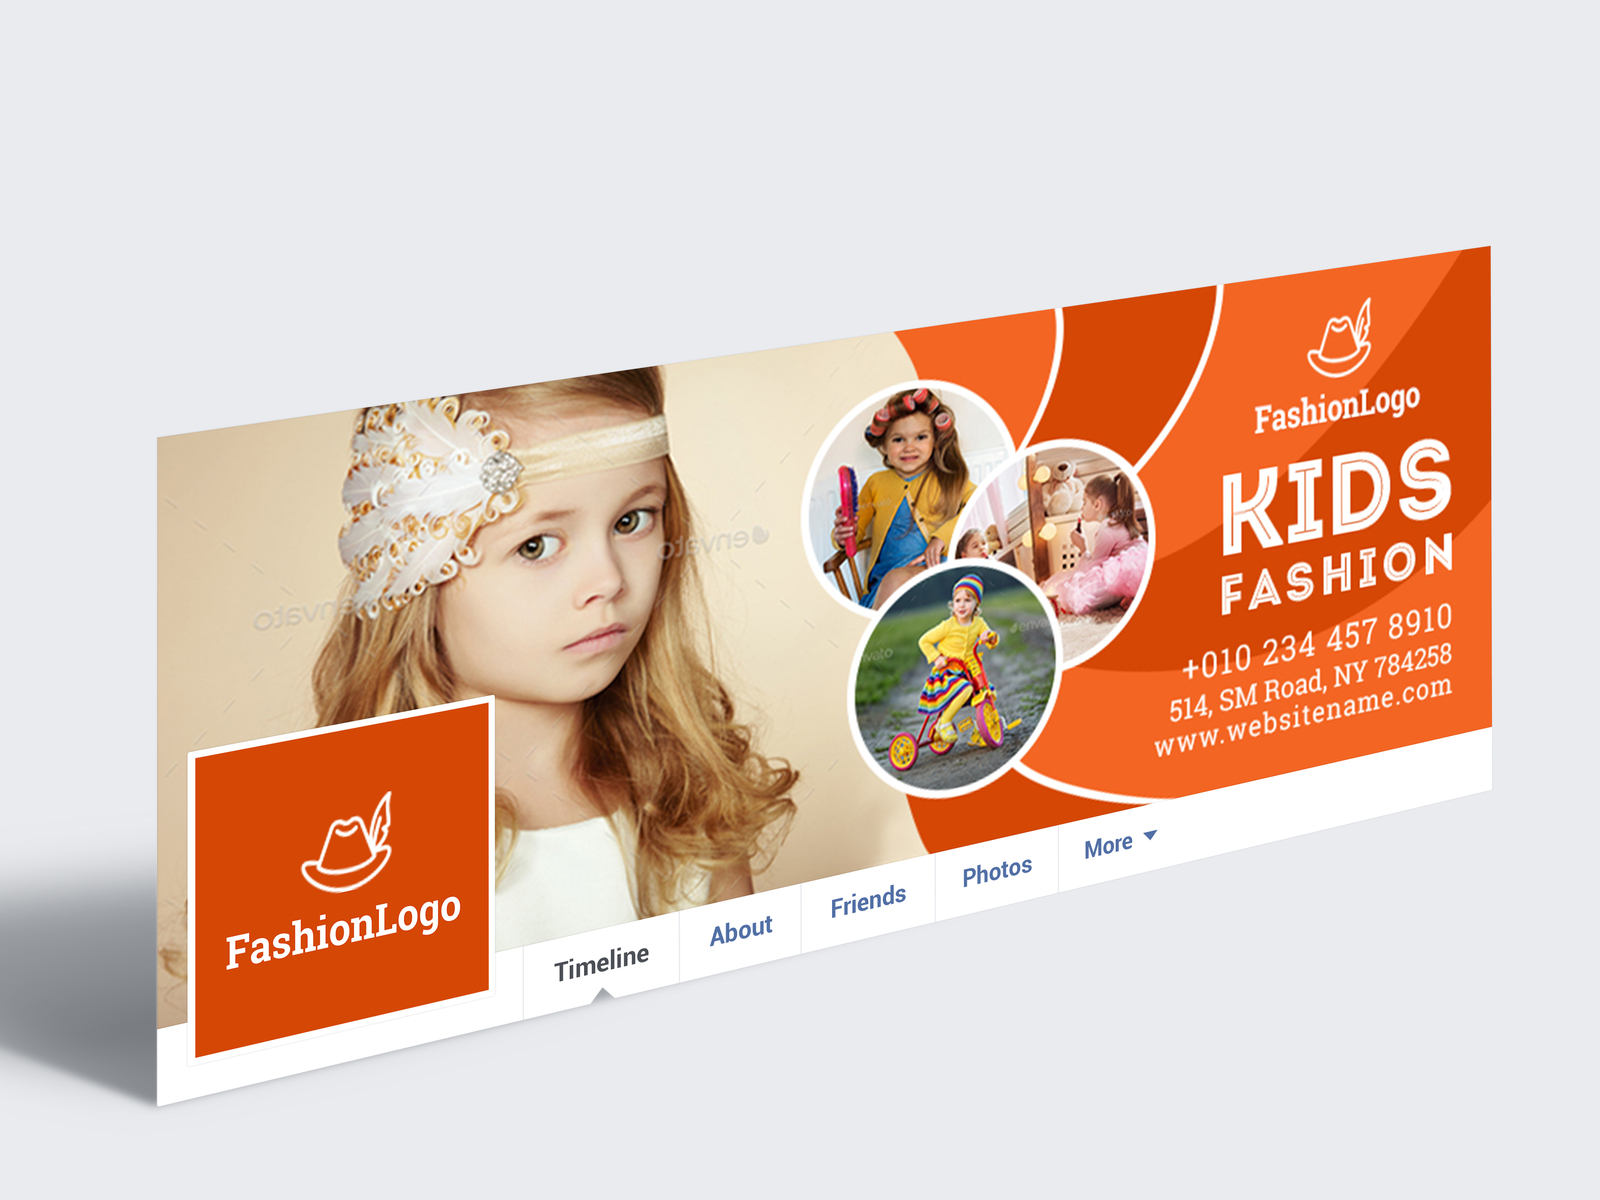 Kids Fashion Facebook Cover Photo by sumi akther1 on Dribbble